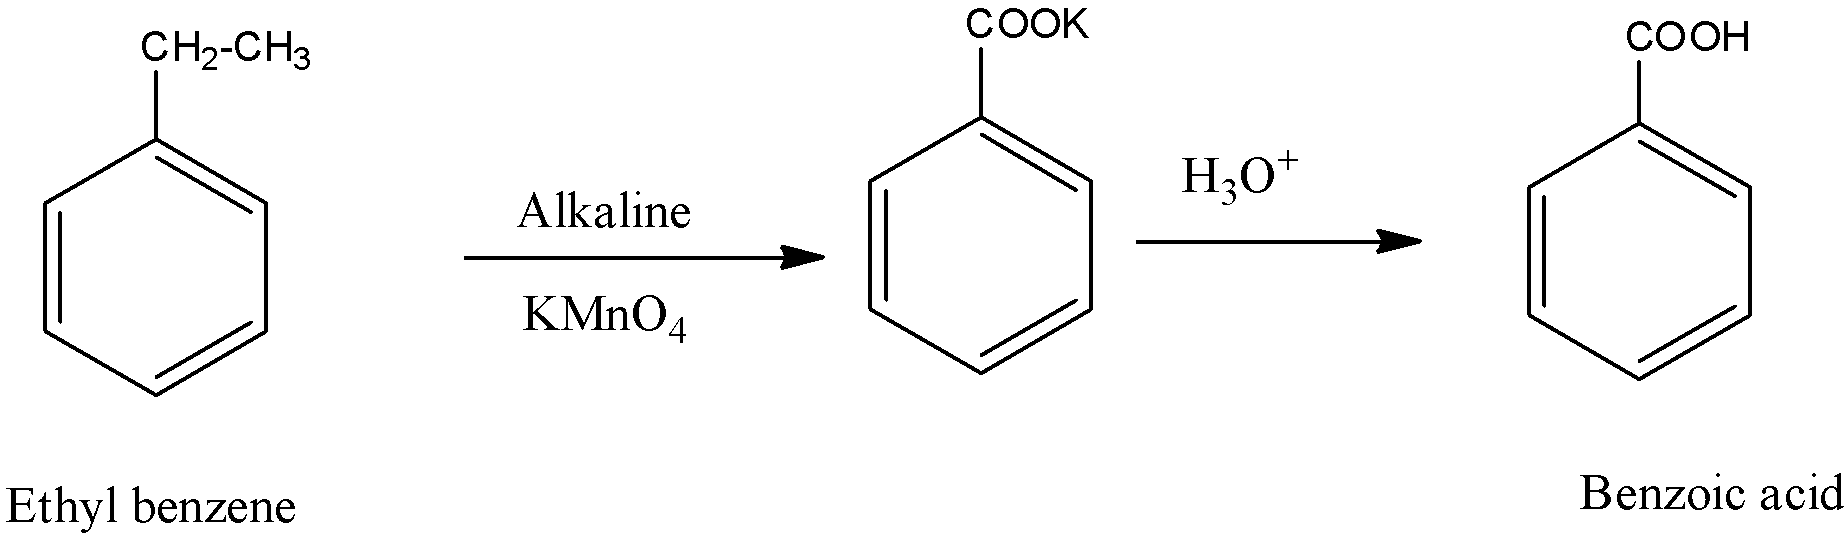 The compound formed as a result of oxidation of ethylbenzene by  \\[{\\text{KMn}}{{\\text{O}}_{\\text{4}}}\\]  is:A.benzophenoneB.acetophenoneC.benzoic acidD.benzyl alcohol